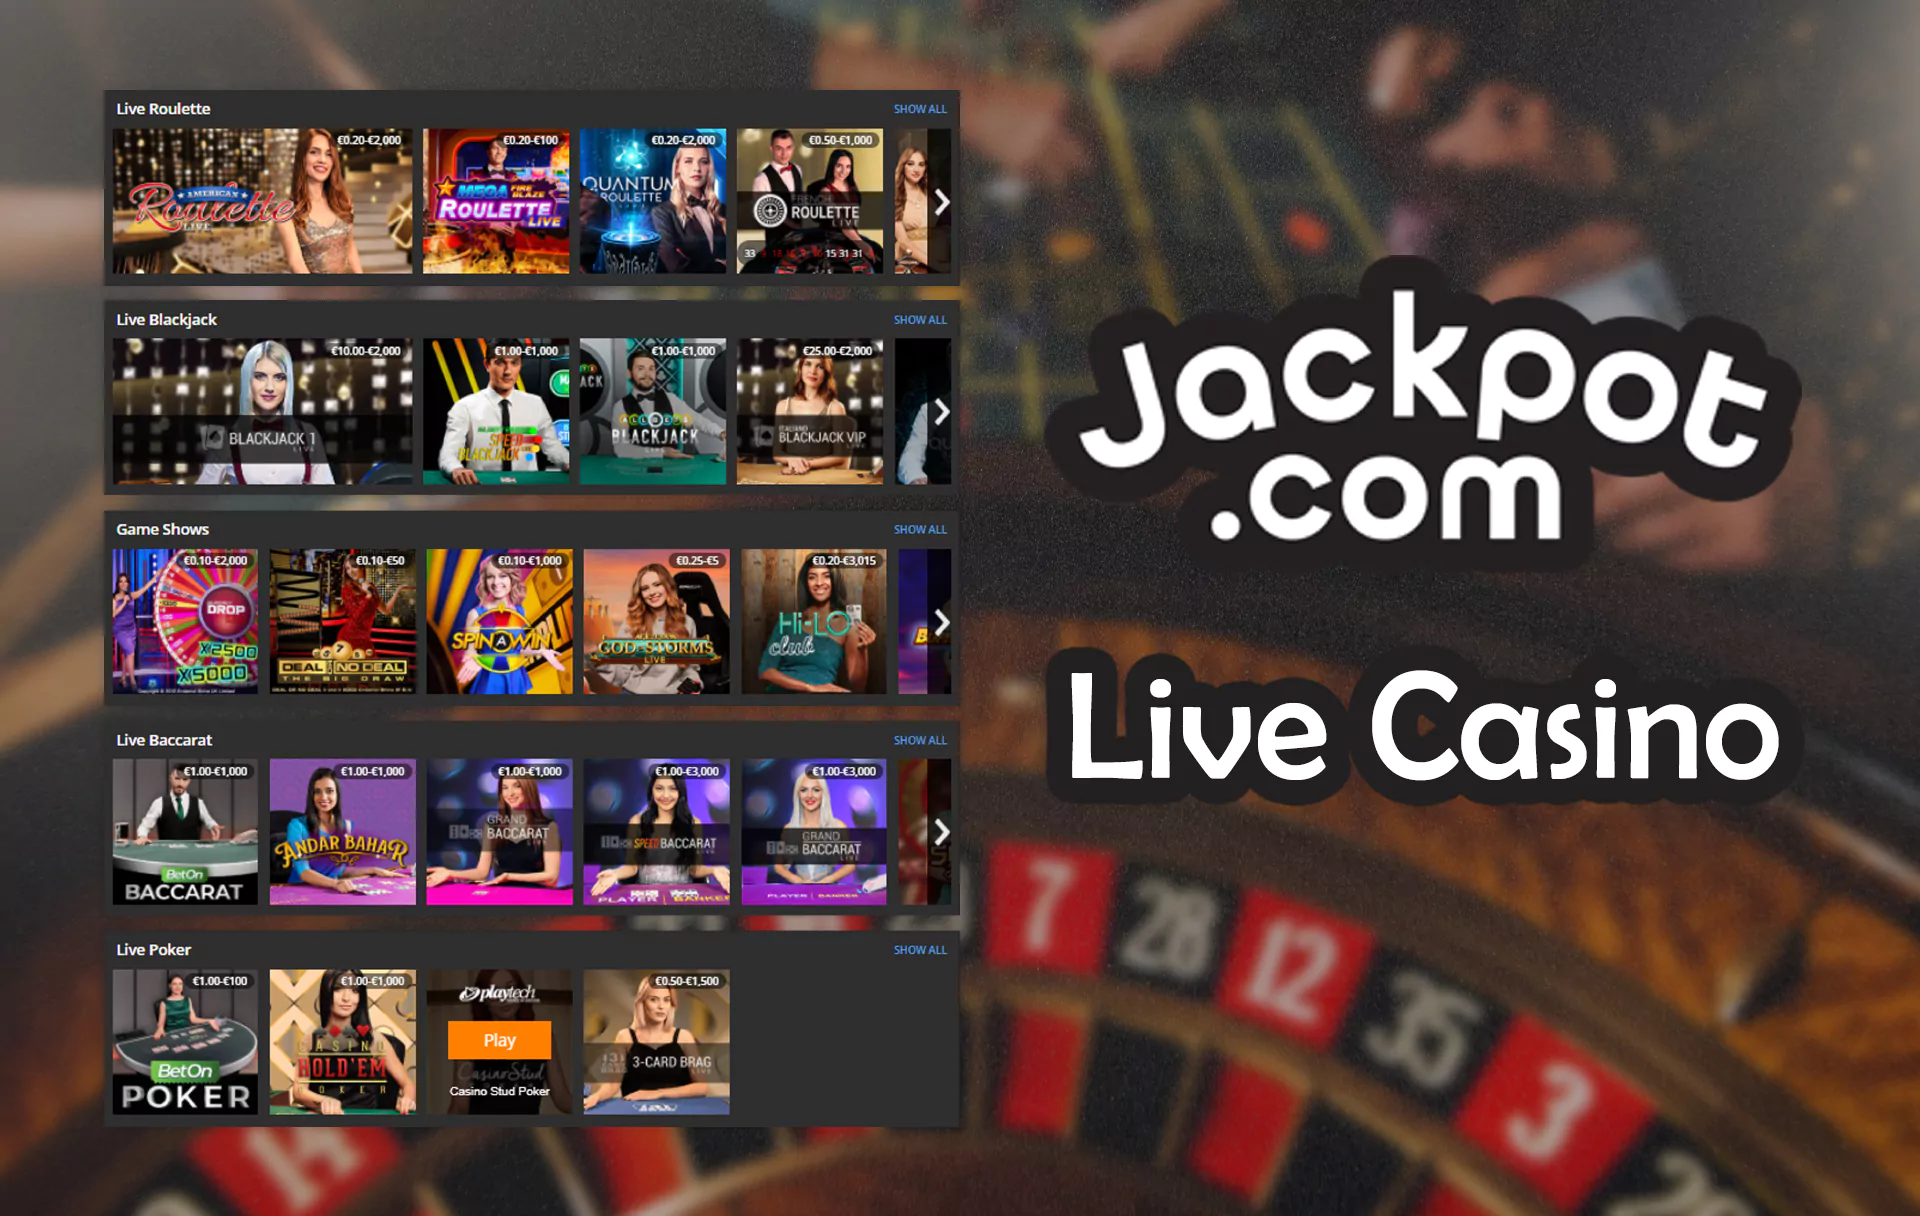 In the Live Casino, you find the games with real dealers.